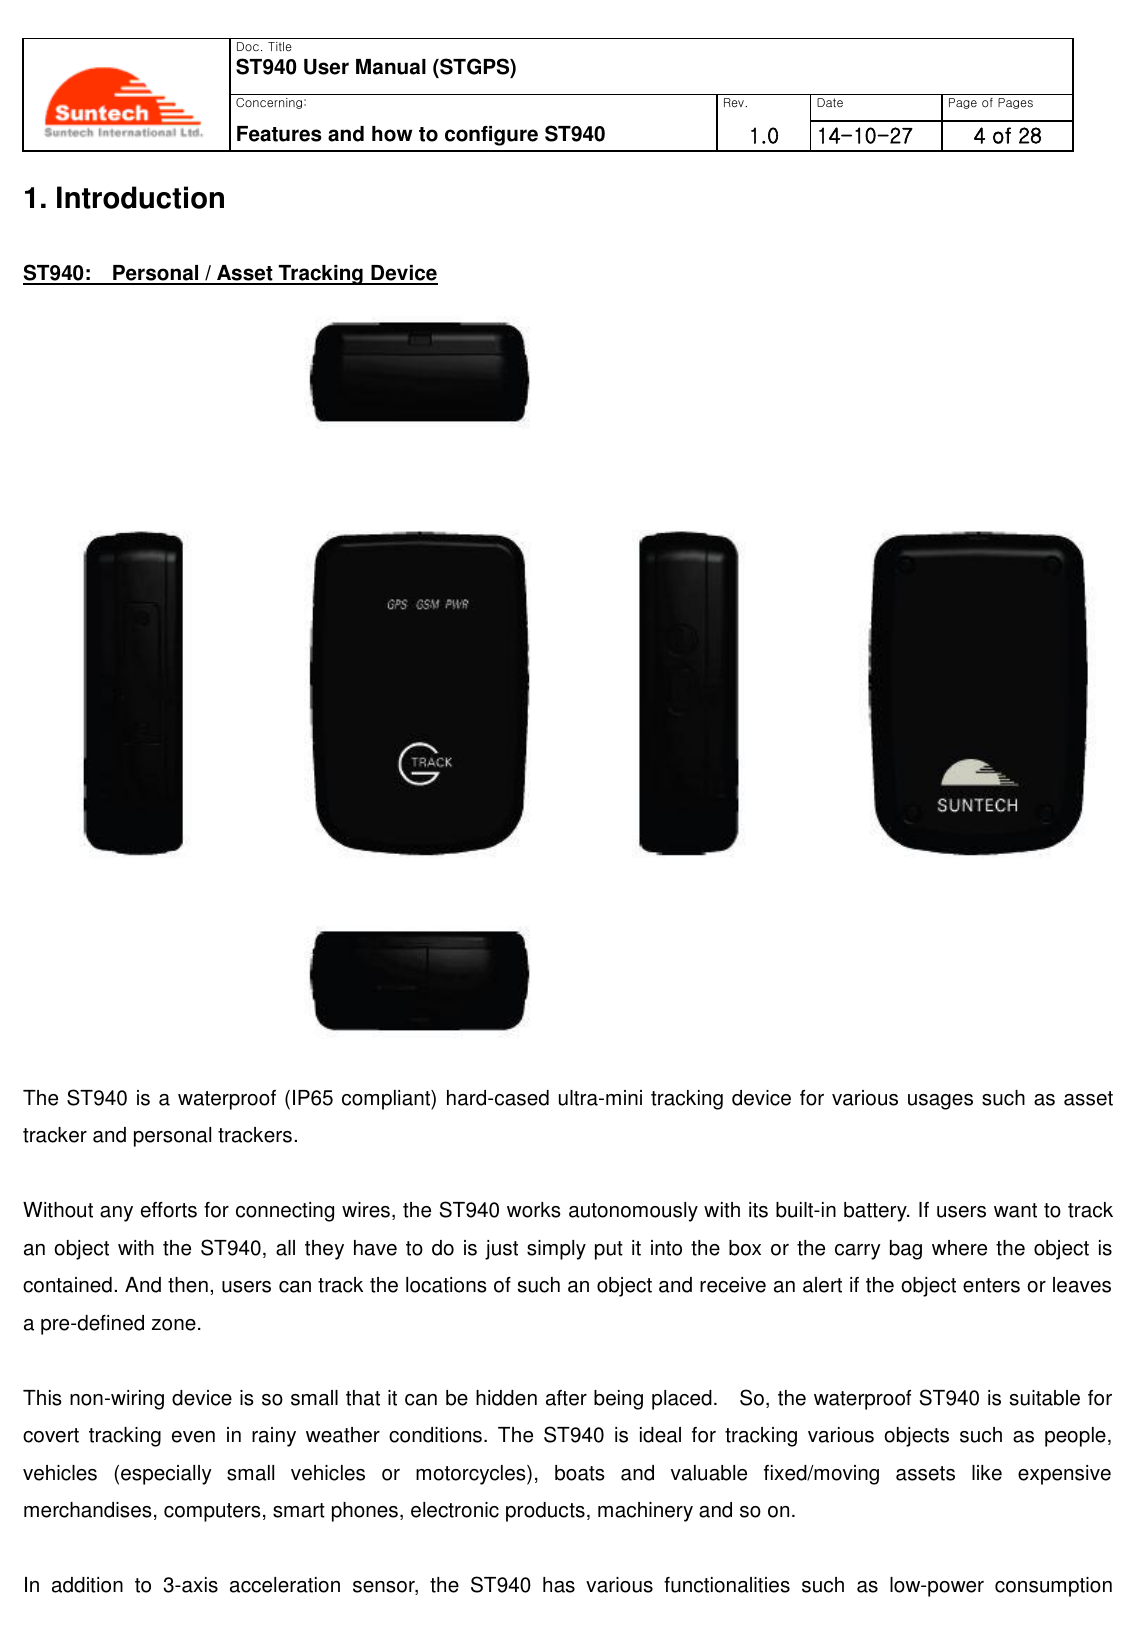   Doc. Title ST940 User Manual (STGPS) Concerning: Rev. Date Page of Pages Features and how to configure ST940 1.0 0      14-10-27 4 of 28  1. Introduction  ST940:    Personal / Asset Tracking Device   The ST940 is a waterproof (IP65 compliant) hard-cased ultra-mini tracking device for various usages such as asset tracker and personal trackers.  Without any efforts for connecting wires, the ST940 works autonomously with its built-in battery. If users want to track an object with the ST940, all they have to do is just simply put it into the box or the carry bag where the object is contained. And then, users can track the locations of such an object and receive an alert if the object enters or leaves a pre-defined zone.  This non-wiring device is so small that it can be hidden after being placed.    So, the waterproof ST940 is suitable for covert  tracking  even  in  rainy  weather  conditions.  The  ST940  is  ideal  for  tracking  various  objects  such  as  people, vehicles  (especially  small  vehicles  or  motorcycles),  boats  and  valuable  fixed/moving  assets  like  expensive merchandises, computers, smart phones, electronic products, machinery and so on.  In  addition  to  3-axis  acceleration  sensor,  the  ST940  has  various  functionalities  such  as  low-power  consumption 